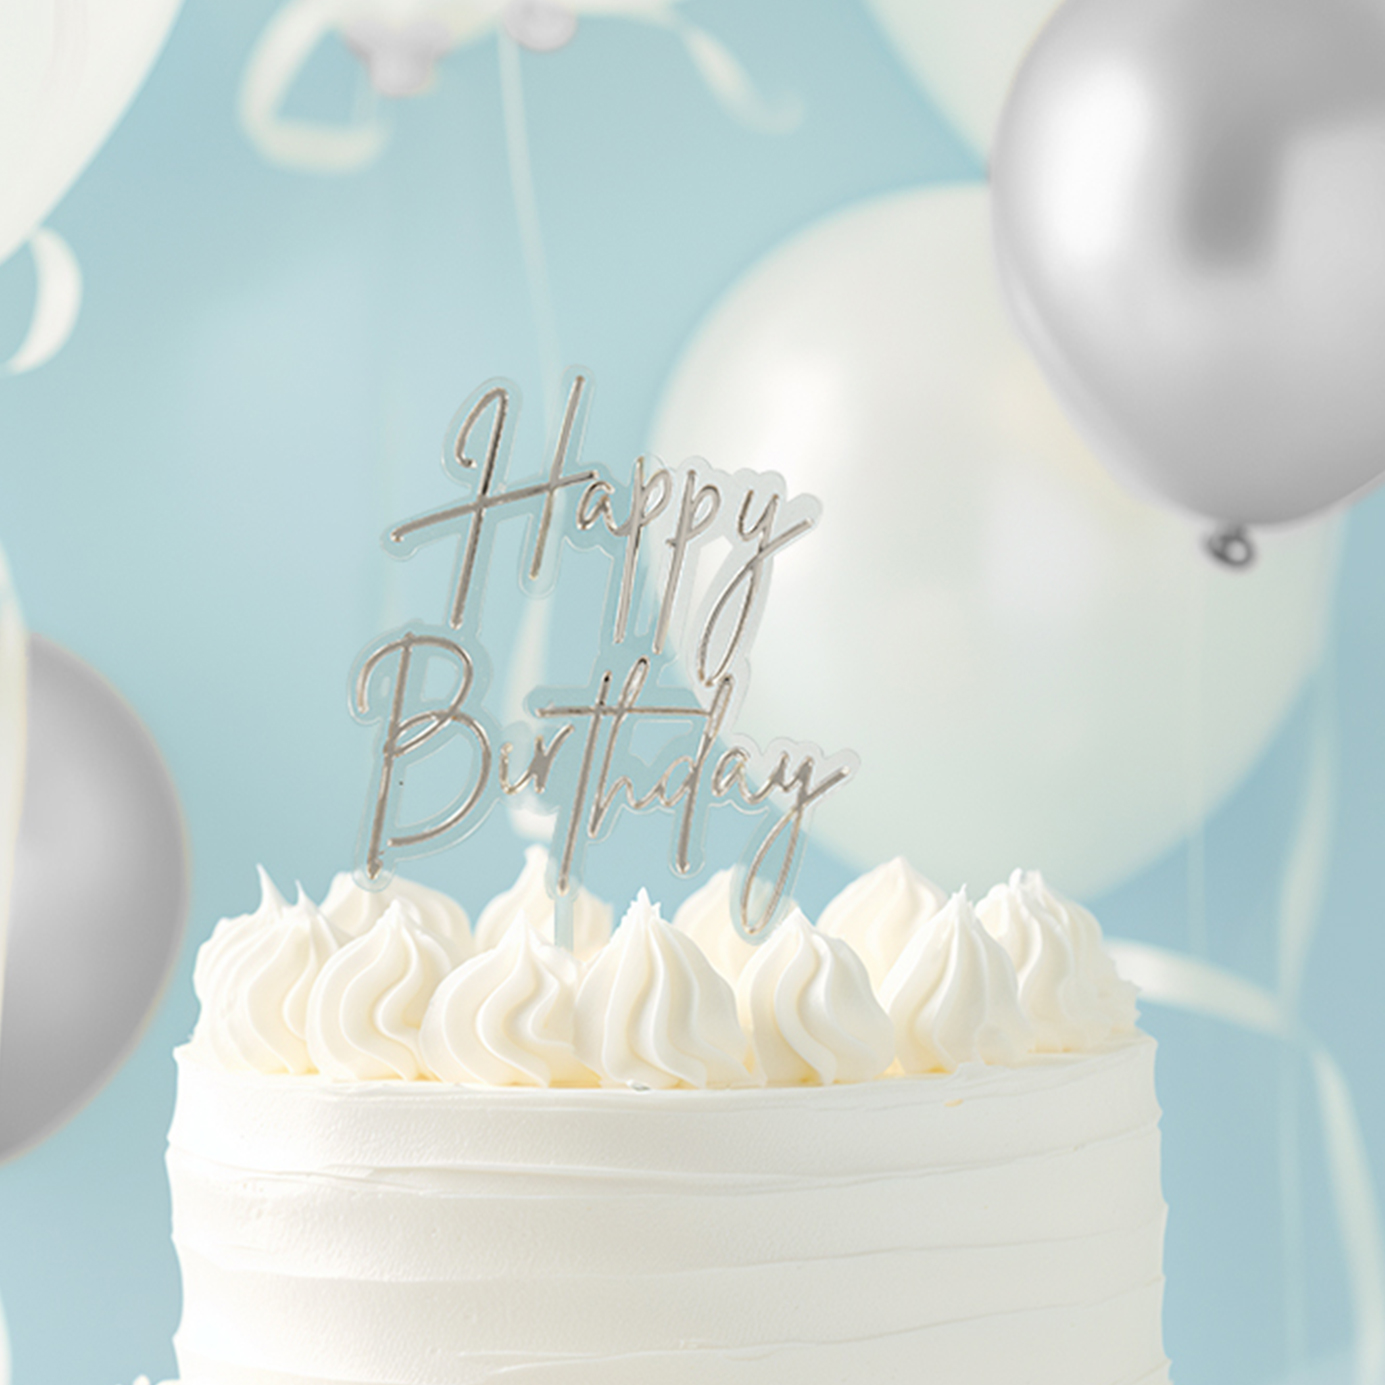 SILVER / CLEAR Layered Cake Topper - HAPPY BIRTHDAY